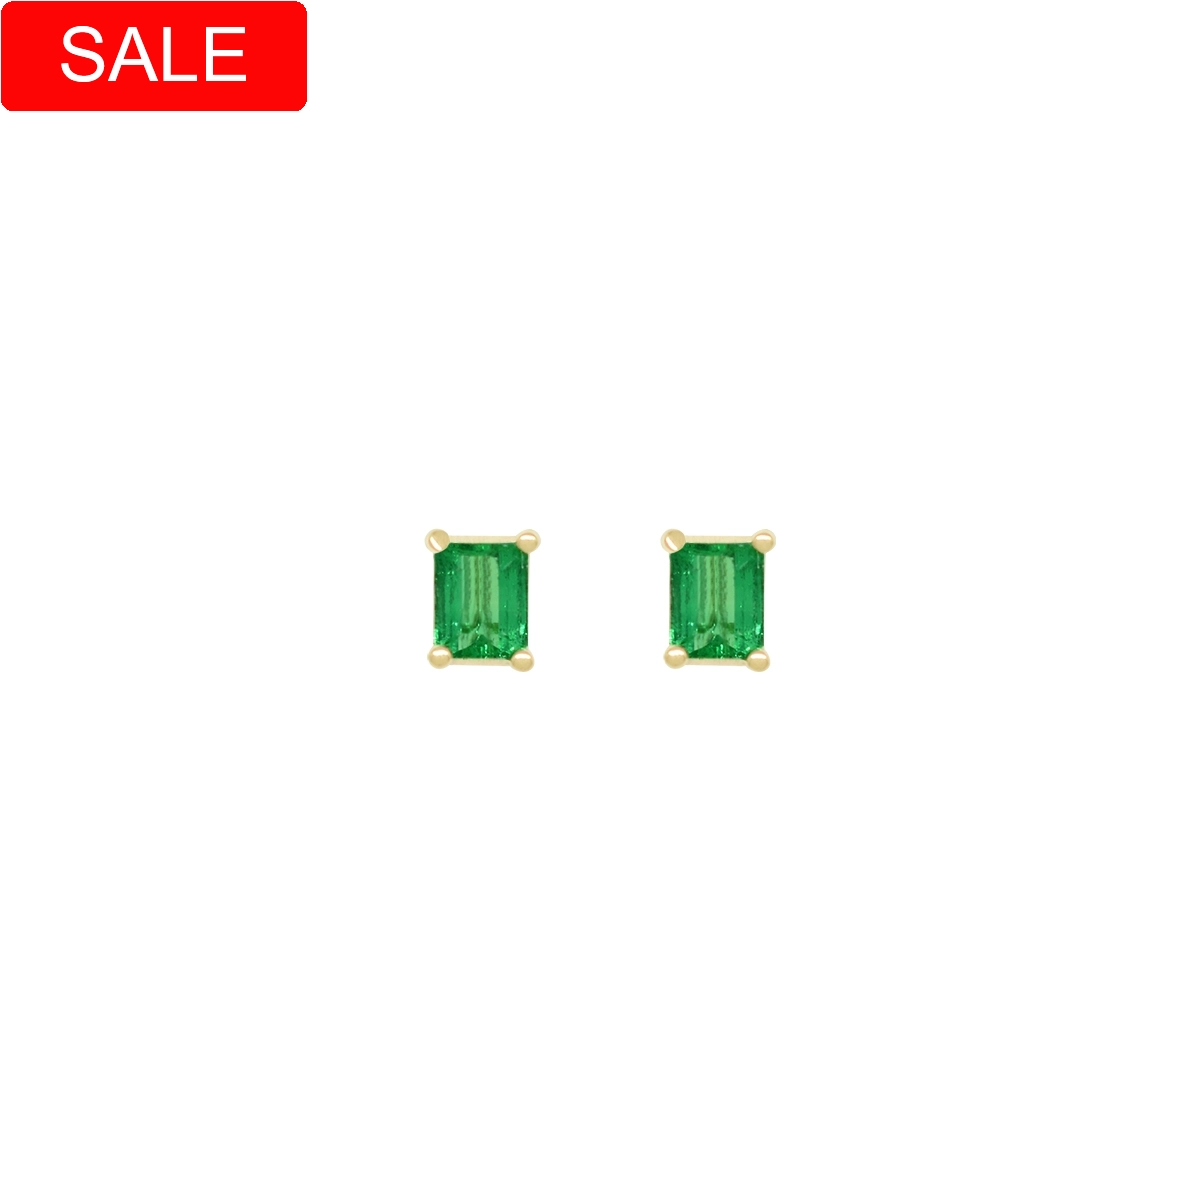 Small Emerald Stud Earrings in 18K Gold Classic Prong Setting